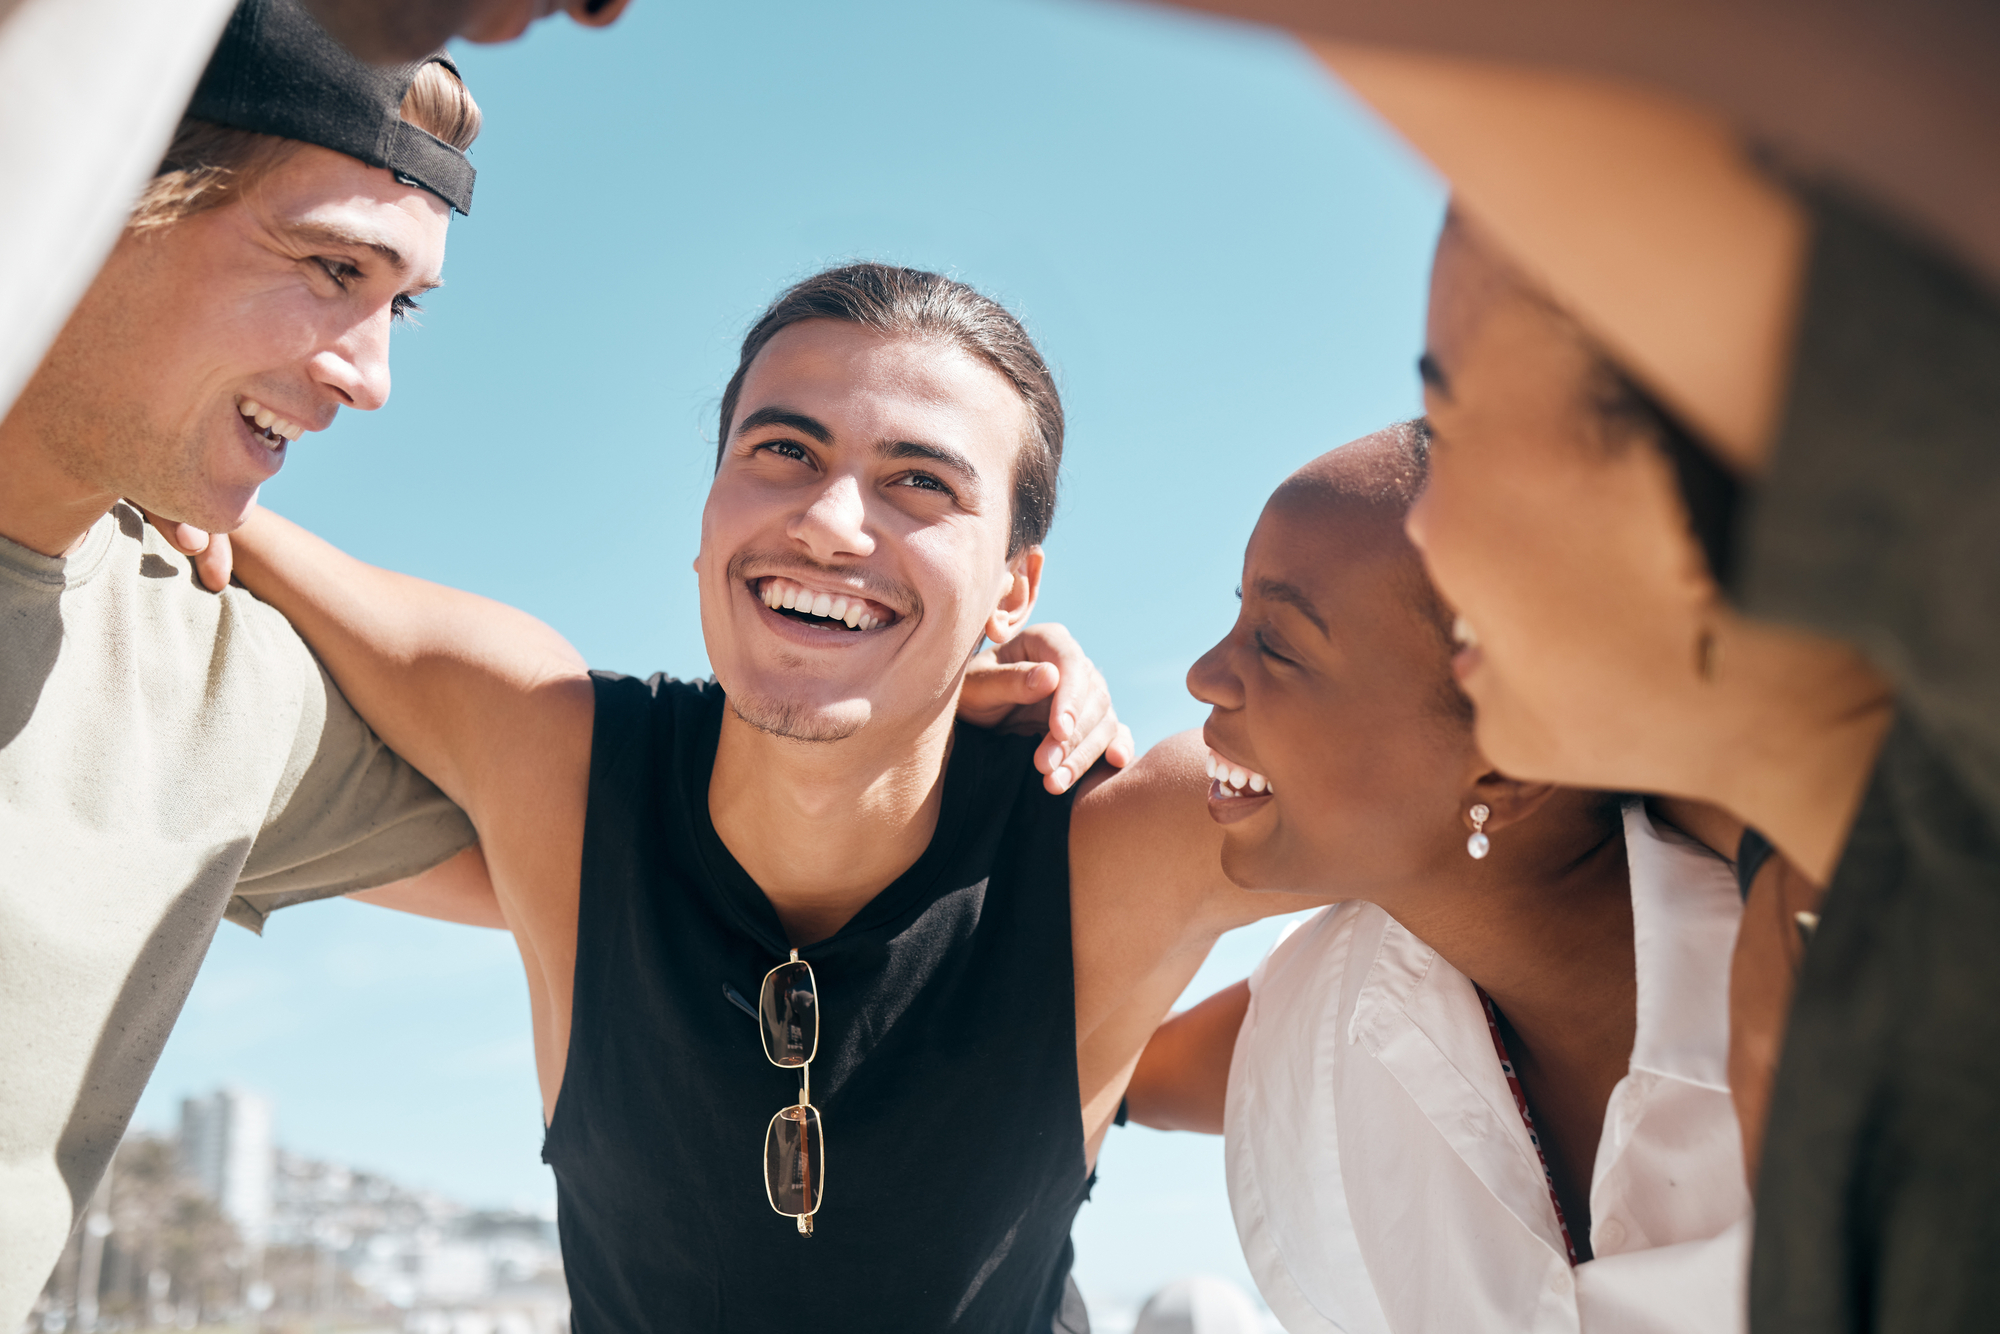 A group of four young friends stand closely together outdoors, smiling and laughing under a clear blue sky. They have their arms around each other’s shoulders, exuding happiness and camaraderie. The setting appears to be a sunny day at the beach.